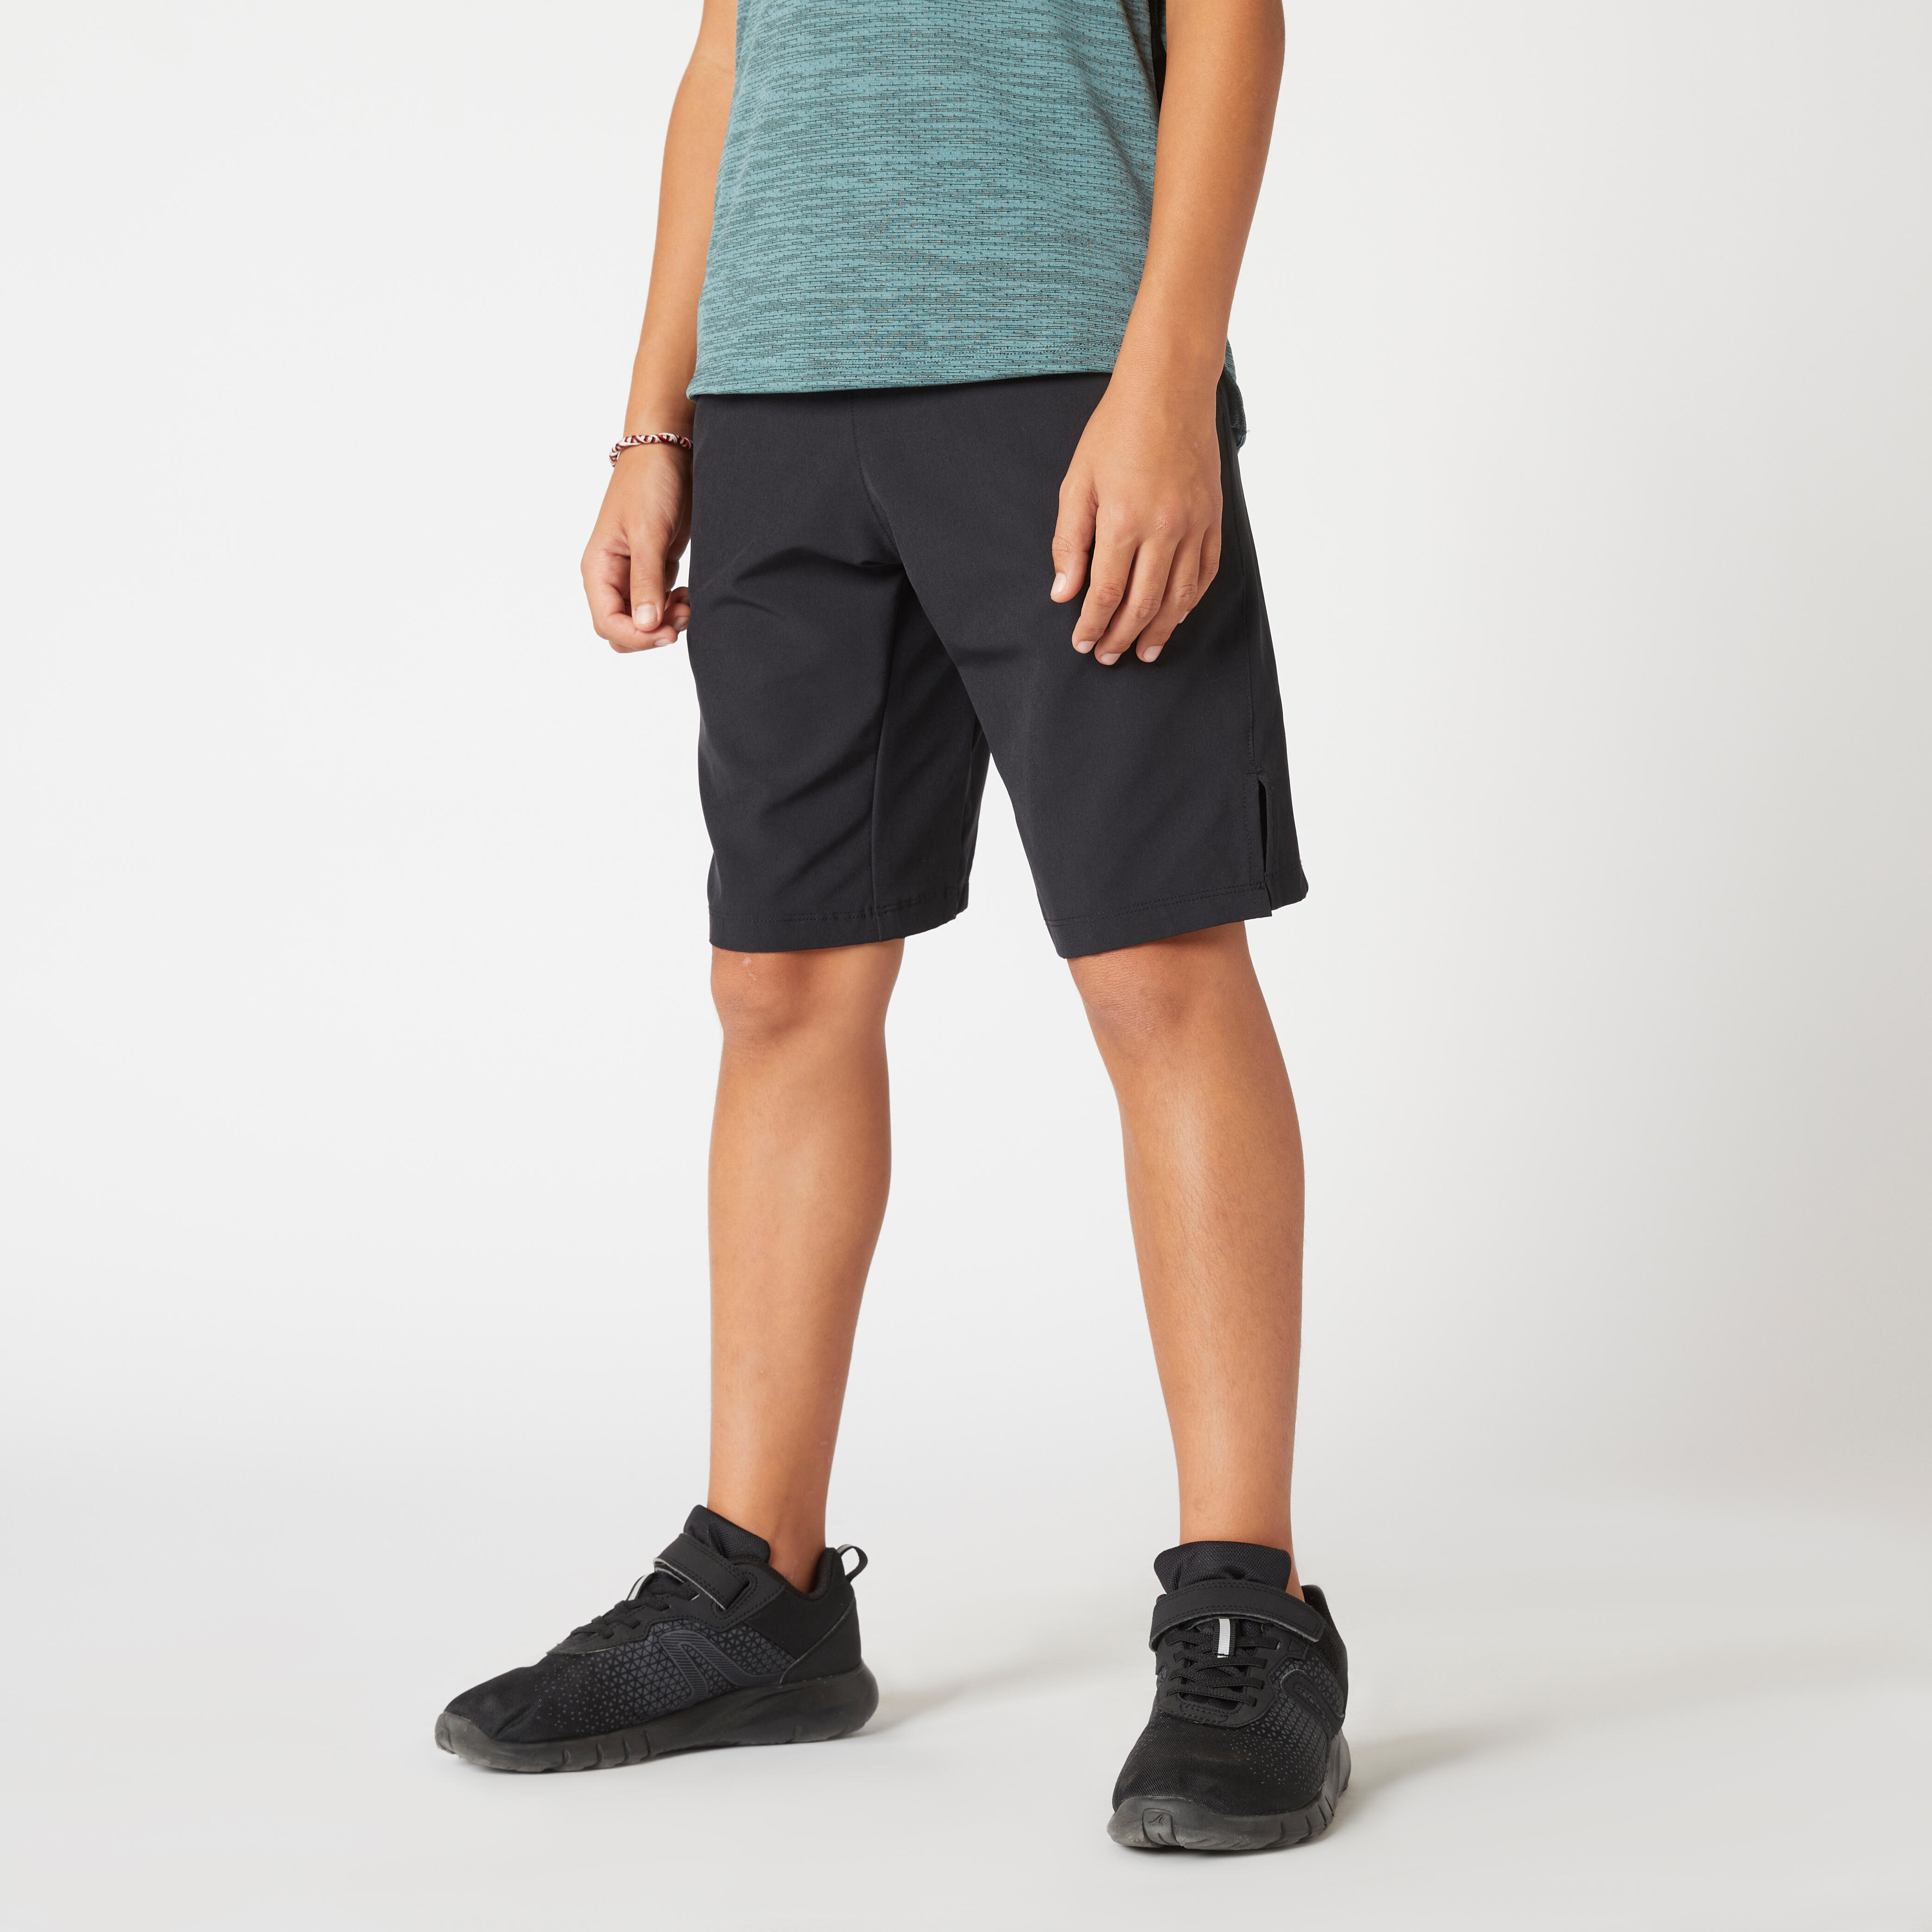 Girls' Soft Gym Shorts - All In Motion™ Black XS